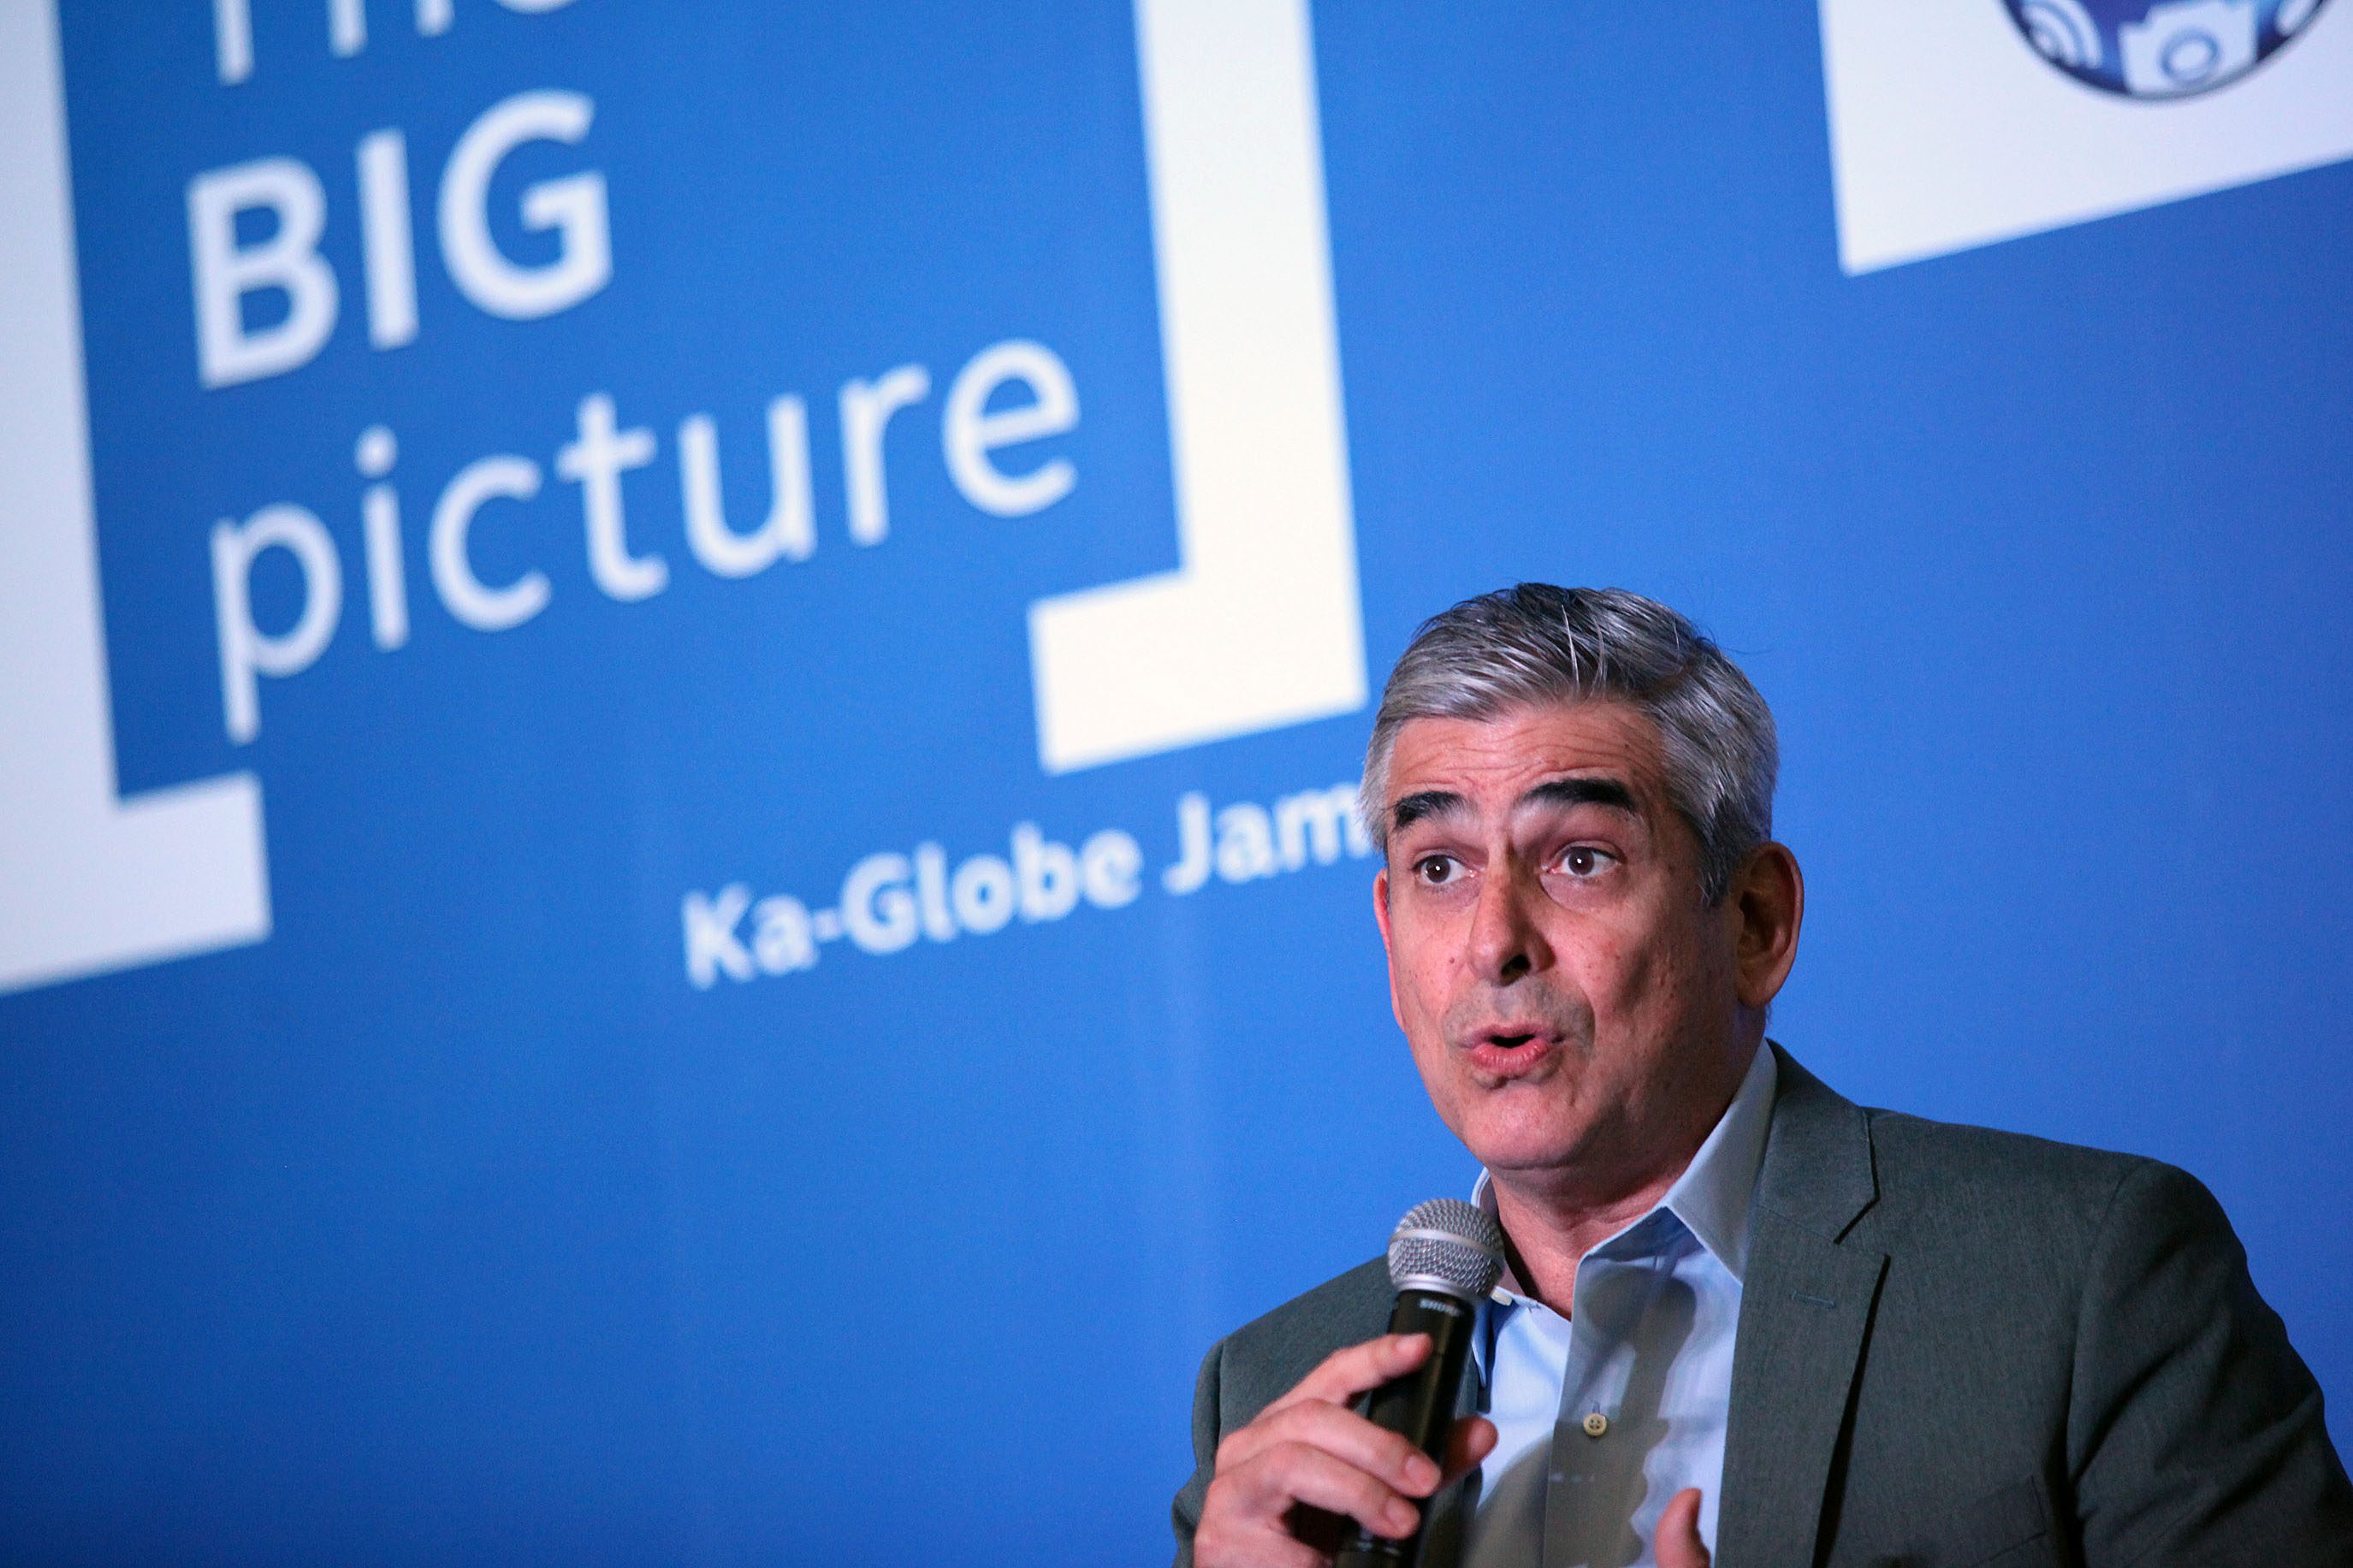 LOOKING AHEAD. 'Does that person make you feel good about the future?' Zobel de Ayala on choosing a presidential candidate. Photo by Josh Albelda/Rappler